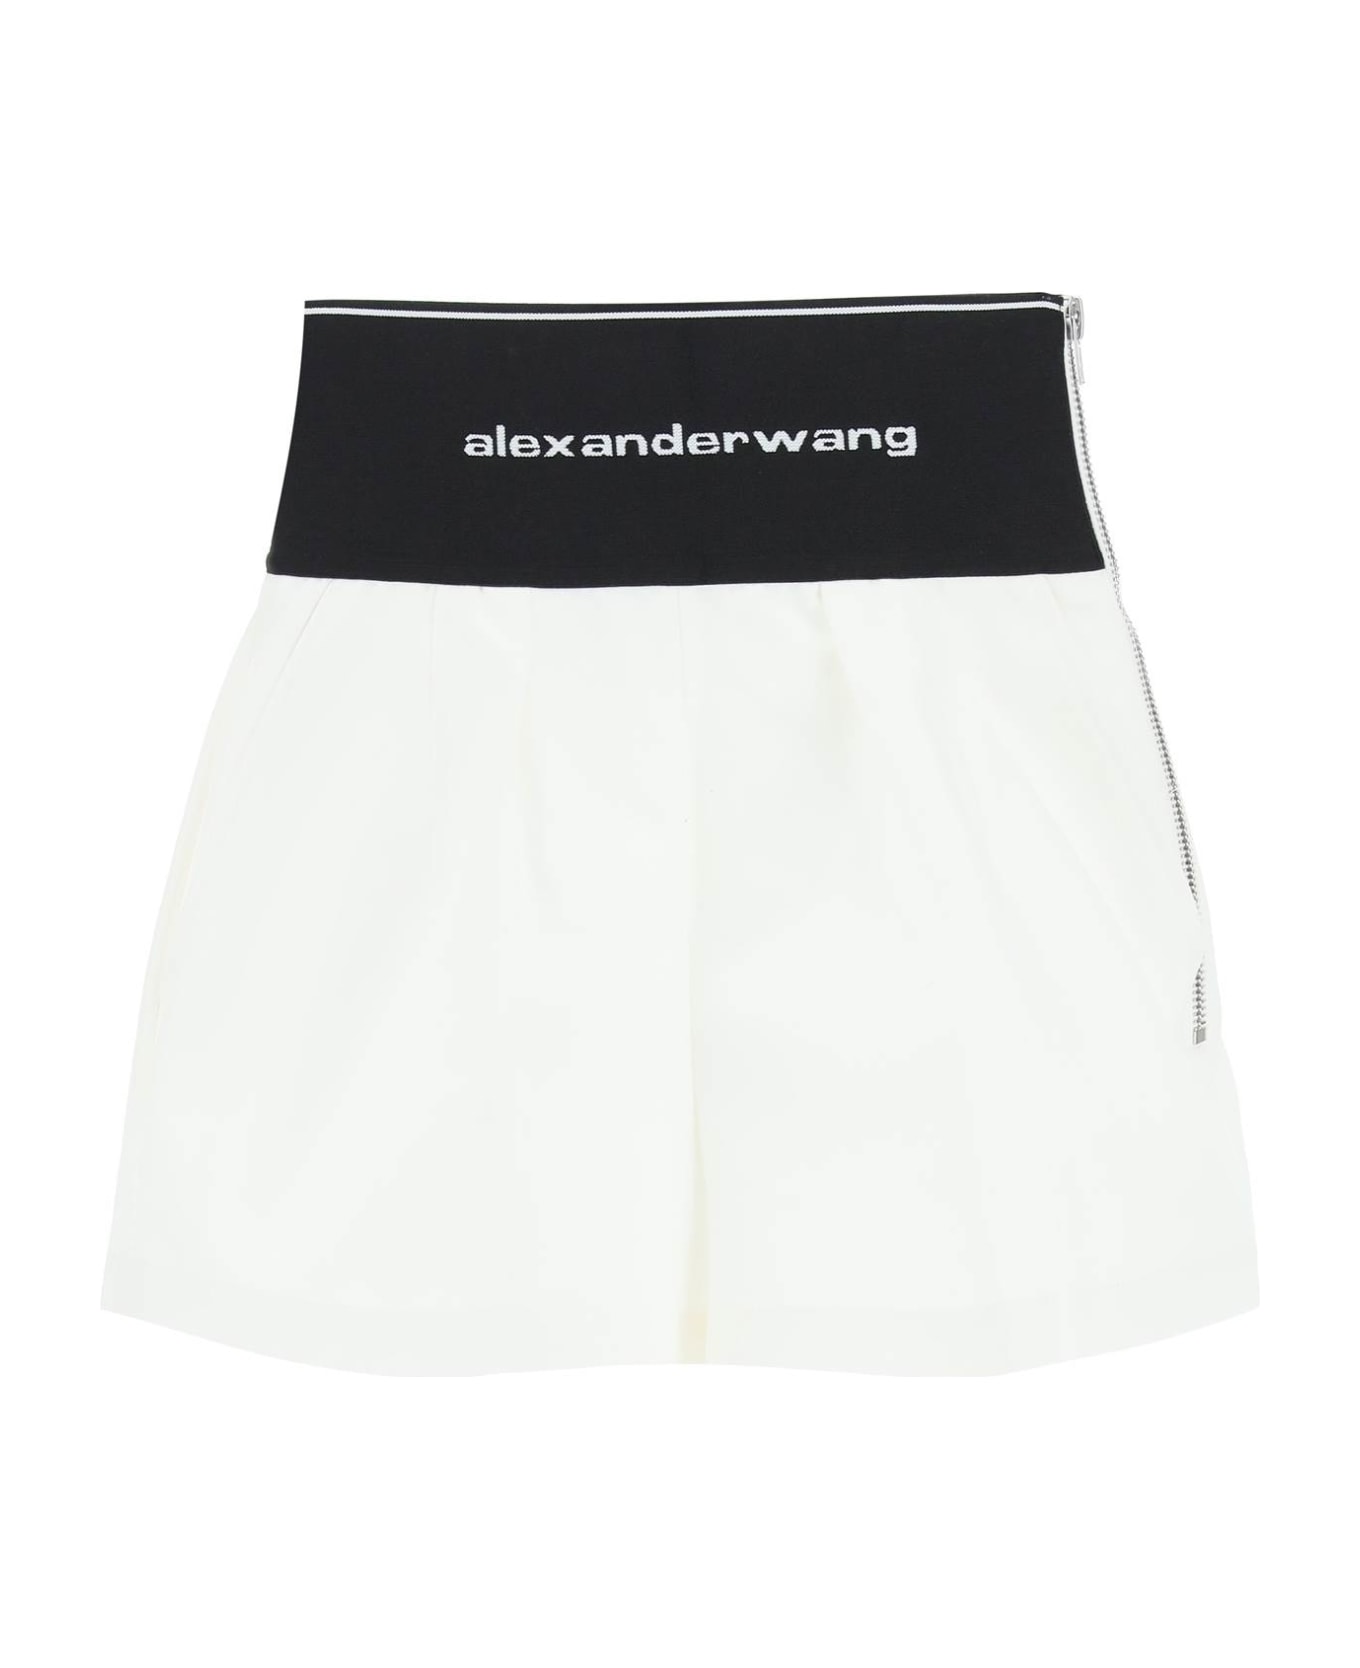 Alexander Wang Cotton And Nylon Shorts With Branded Waistband - SNOW WHITE (White)